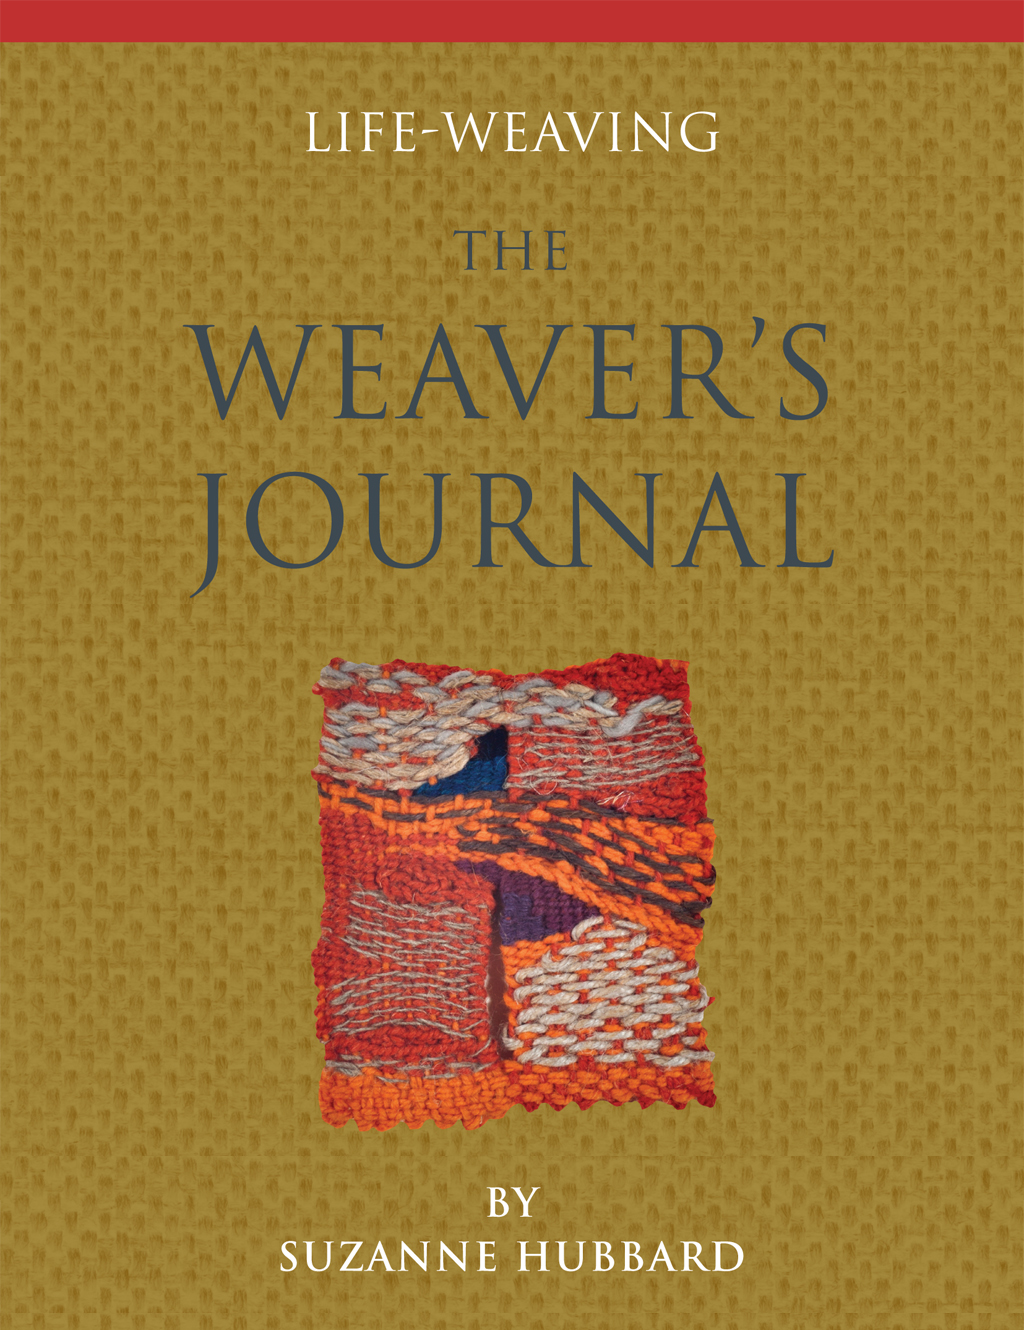 Journal cover for author Suzanne Hubbard, promoting weavings and philosophy